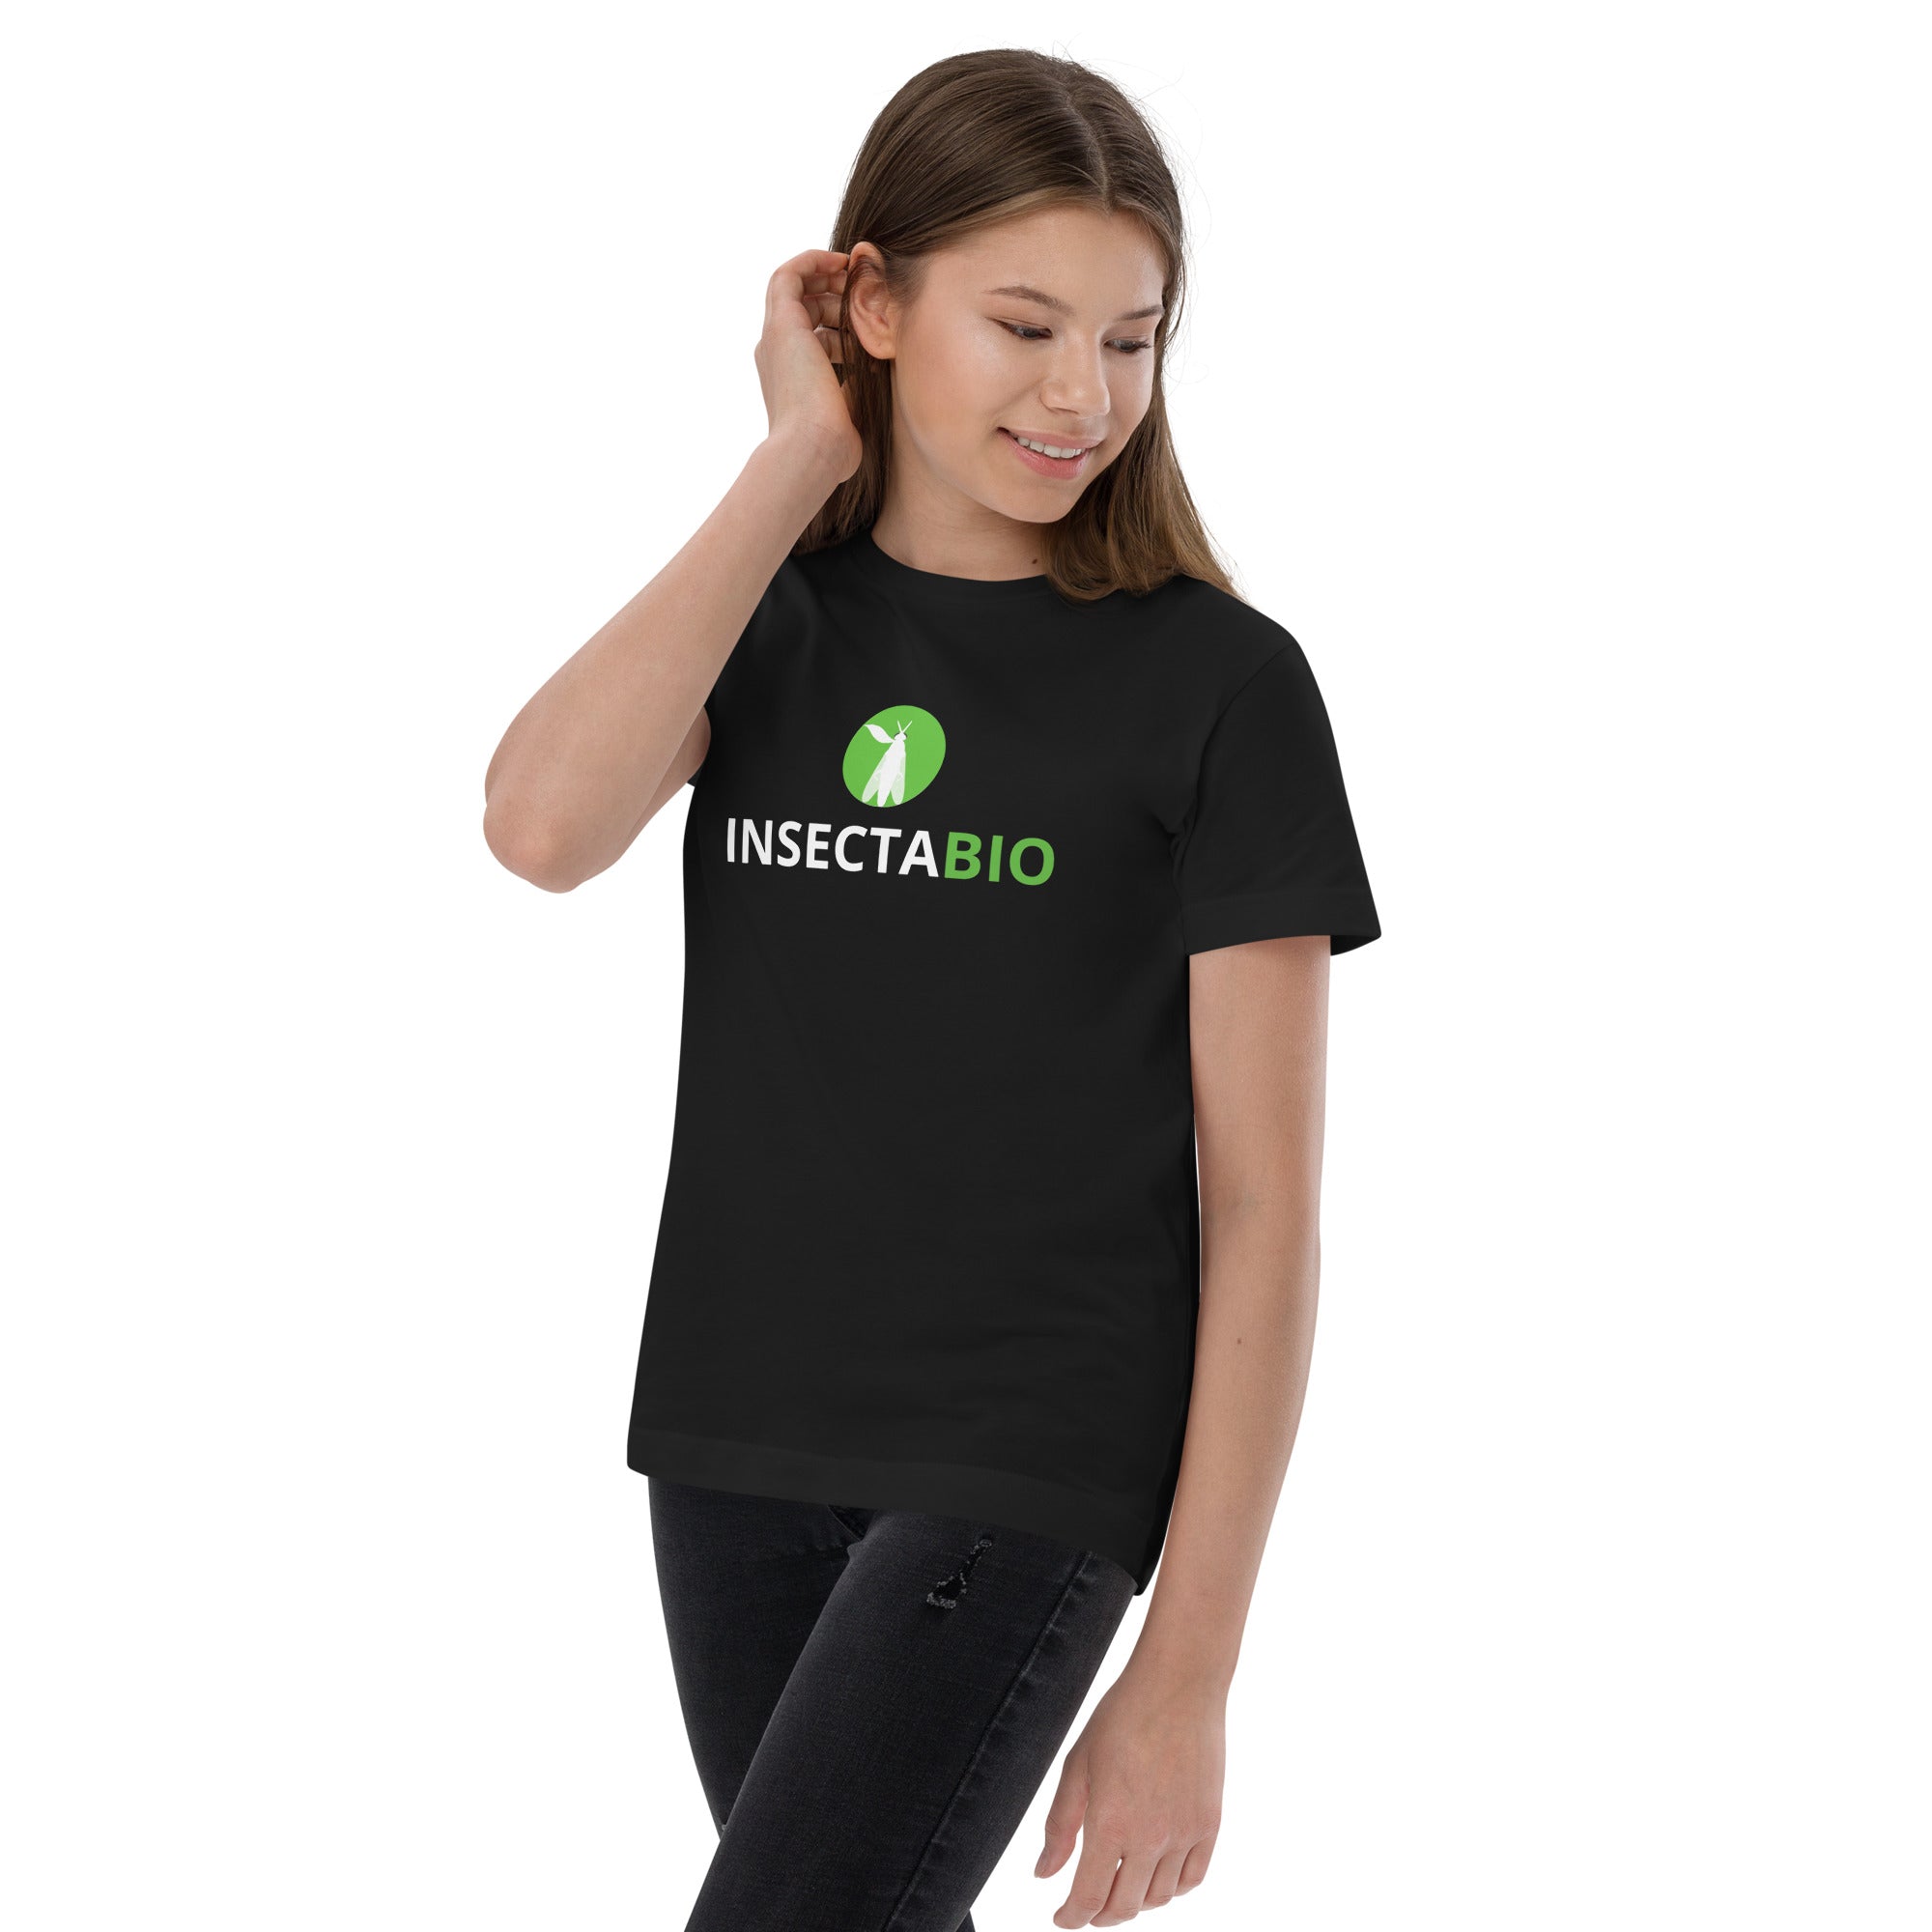 InsectaBio Youth jersey t-shirt